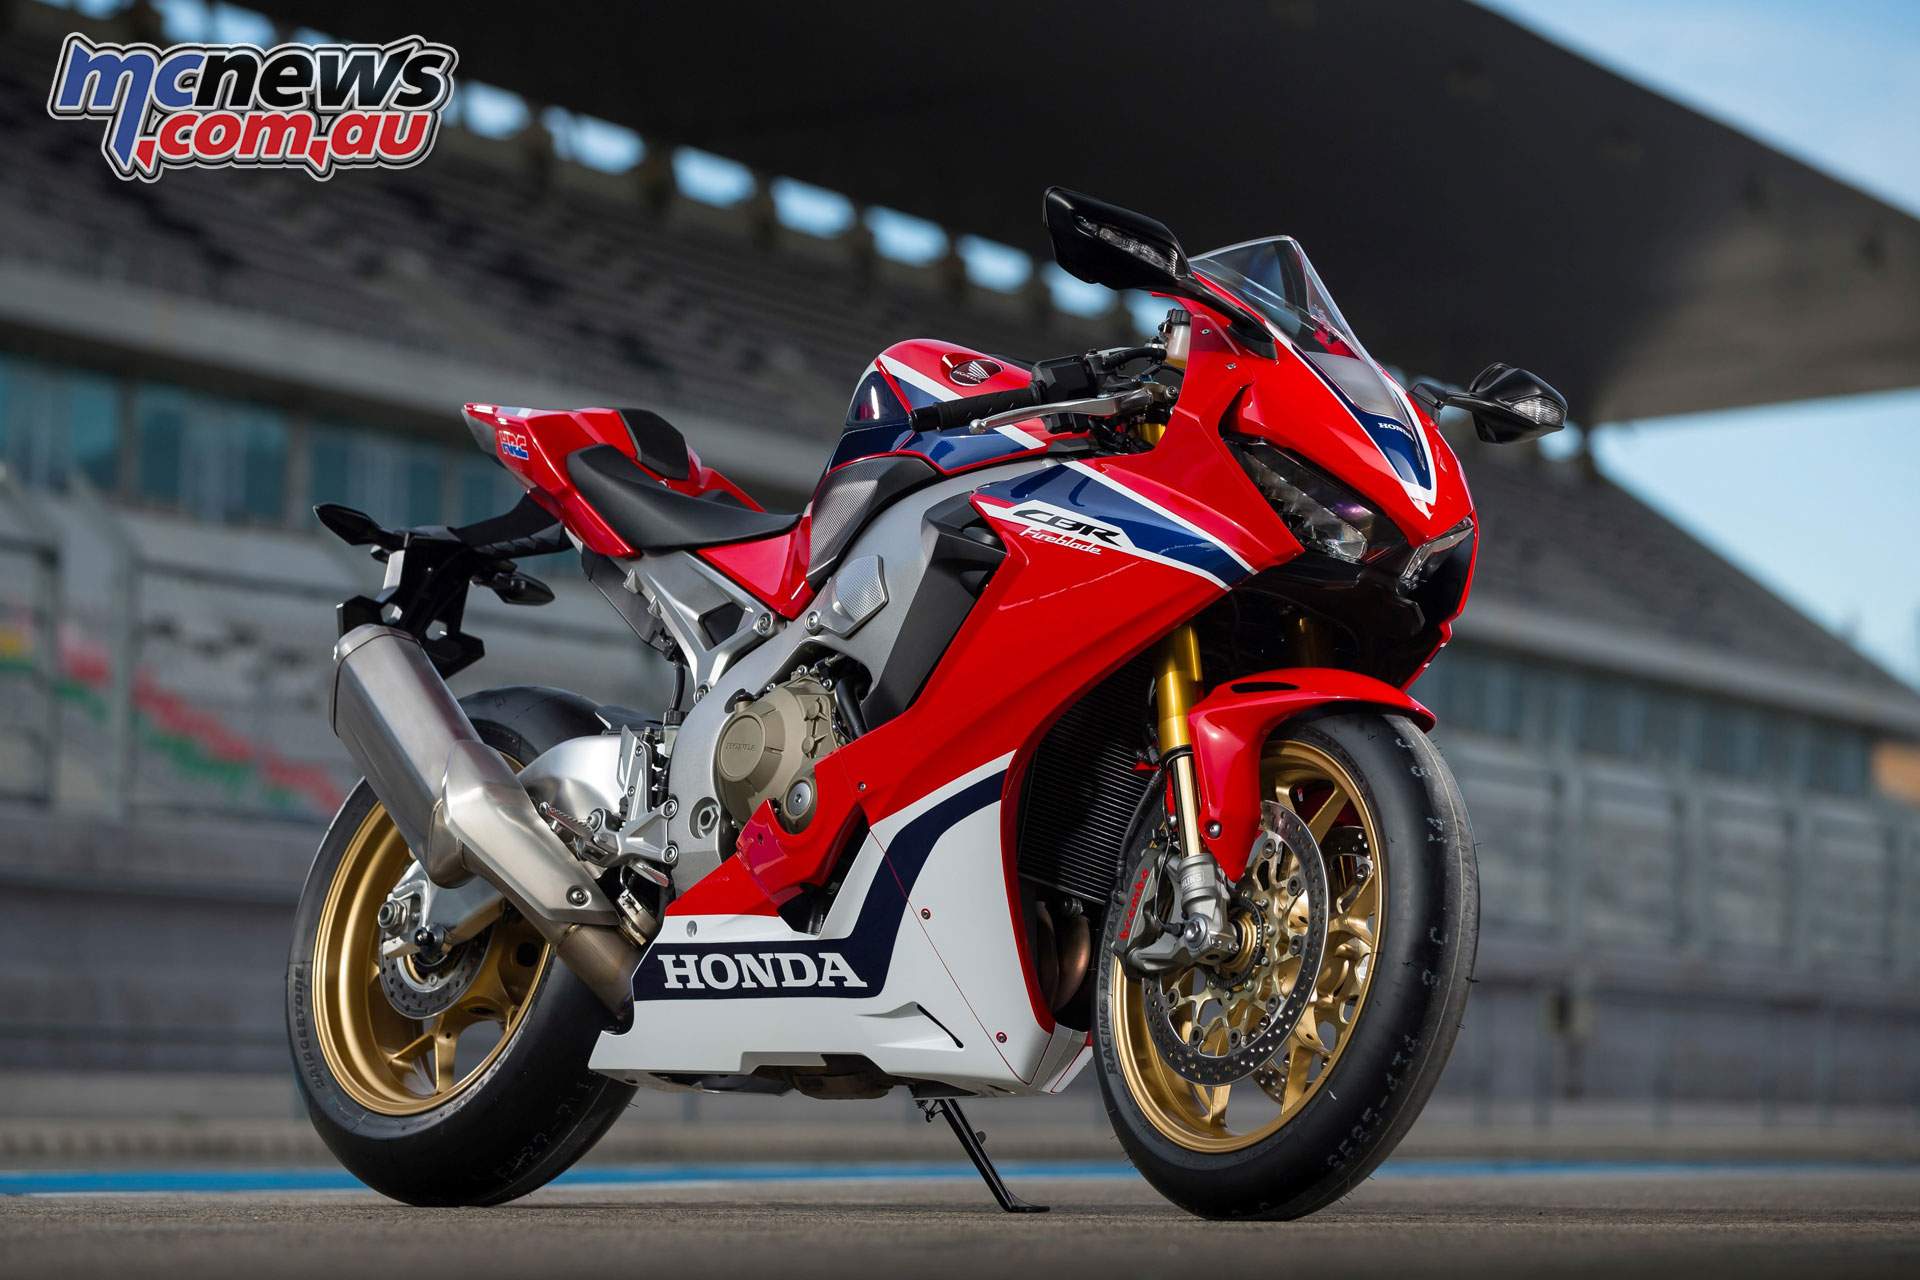 Special 17 Cbr1000rr Launch Offer 21 499 R A Motorcycle News Sport And Reviews